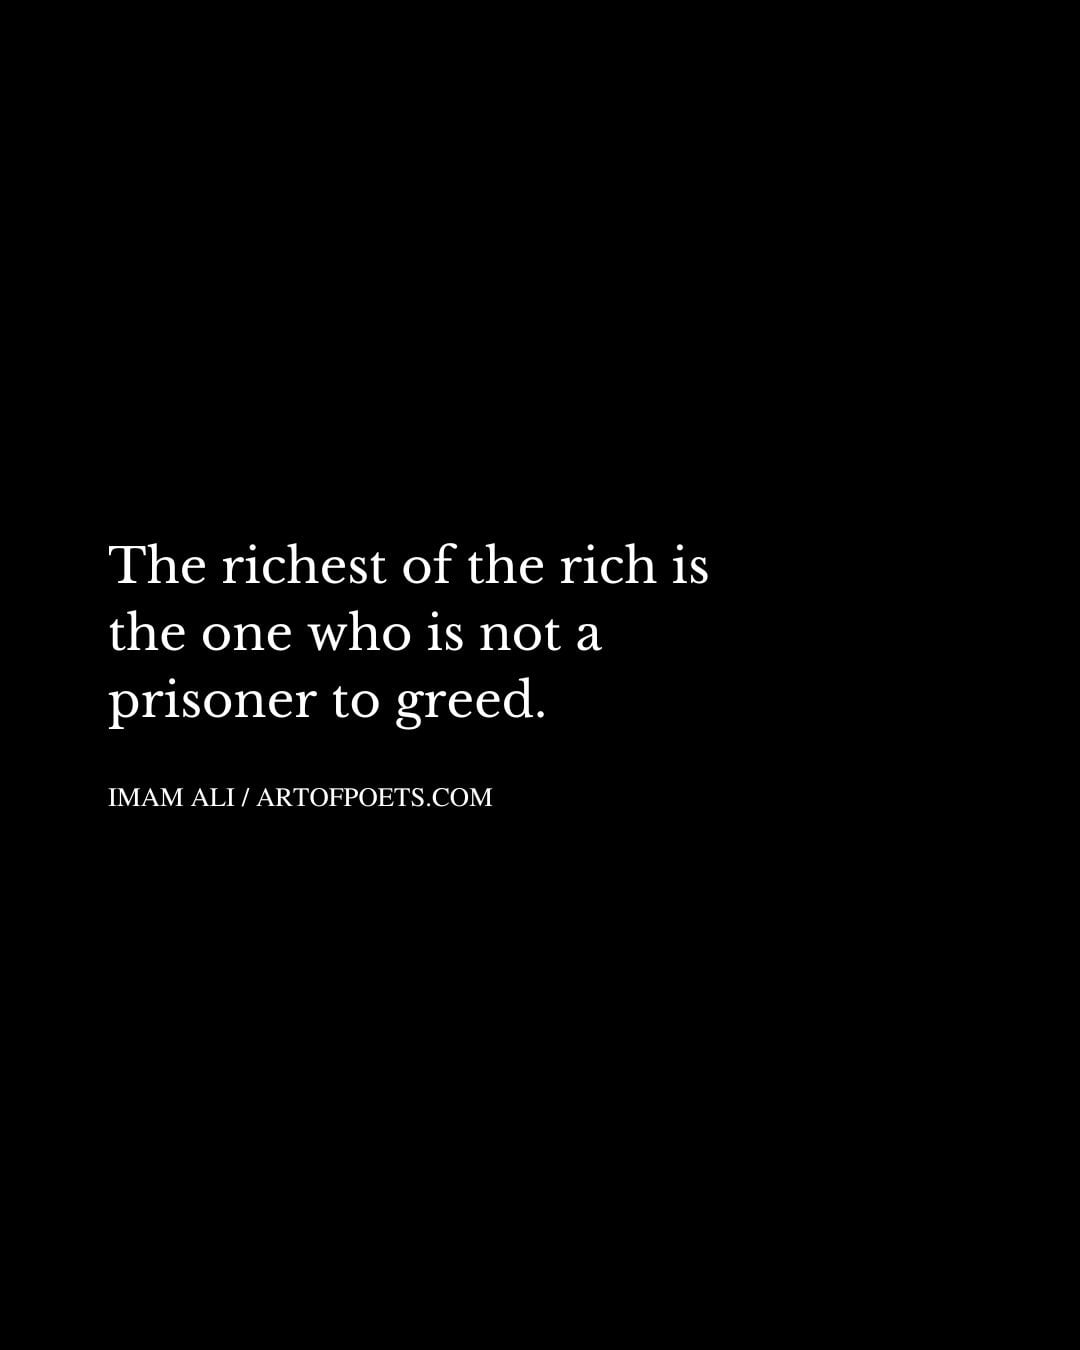 The richest of the rich is the one who is not a prisoner to greed